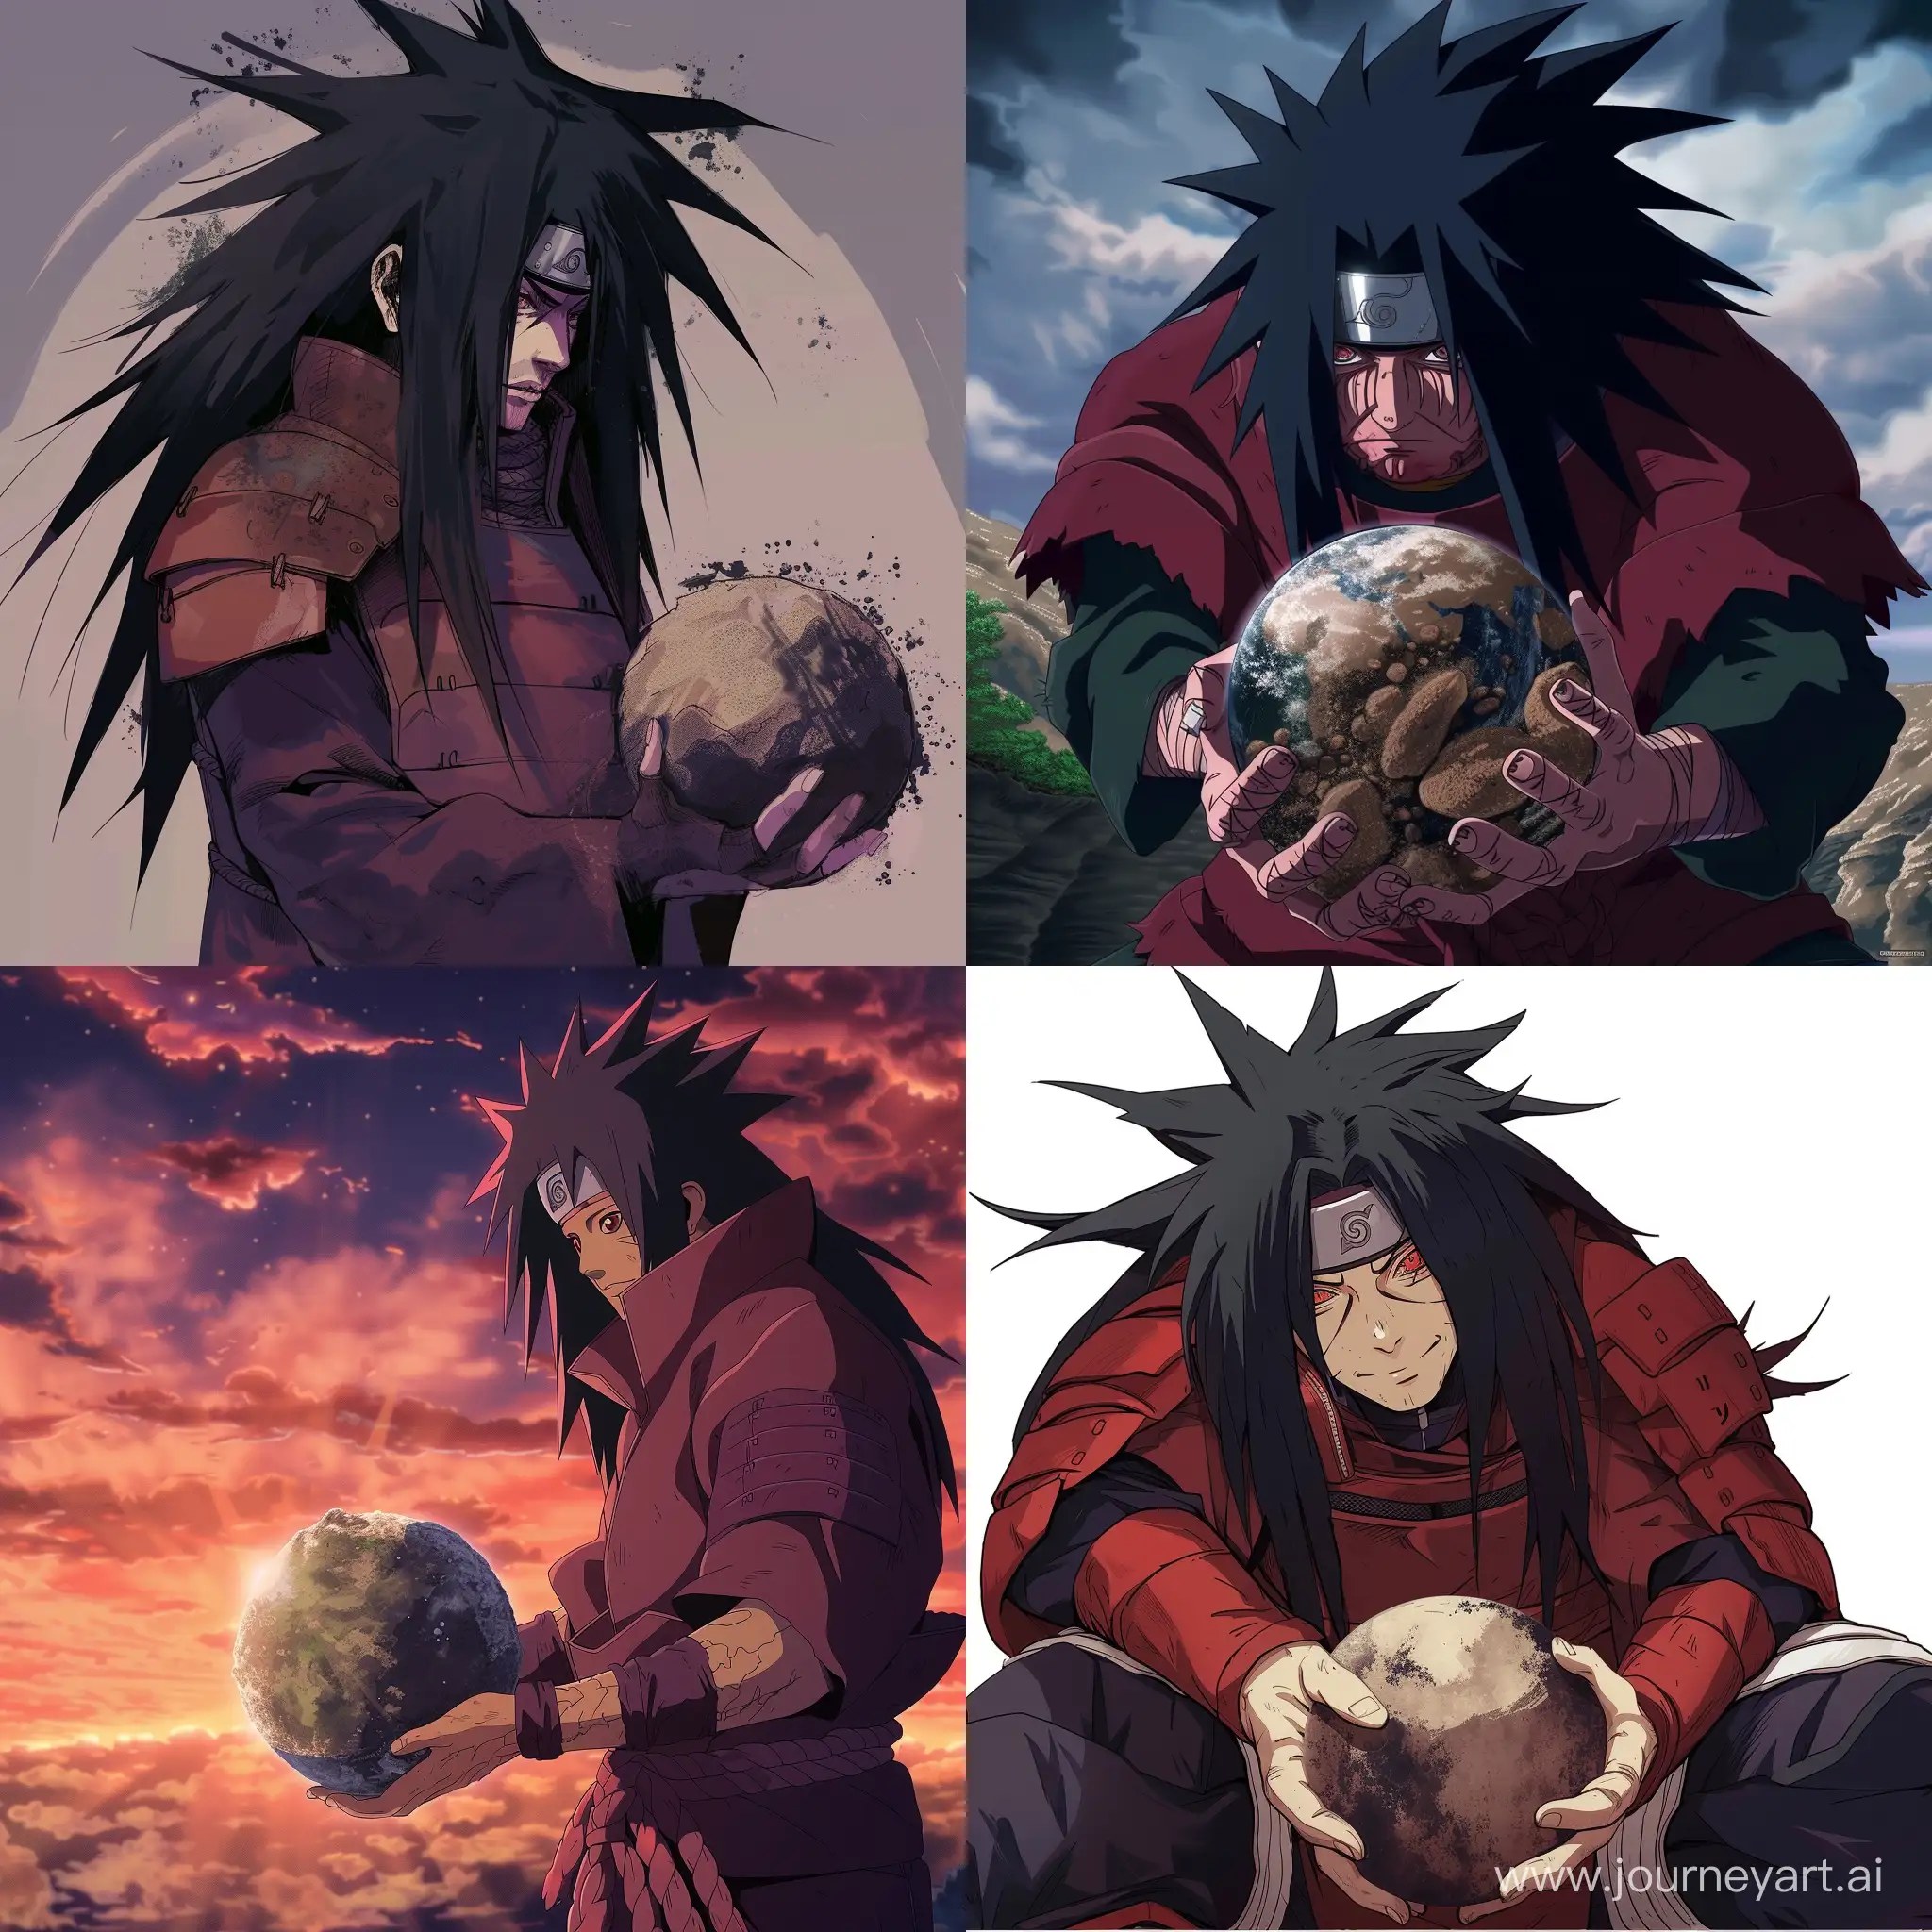 Giant-Madara-Uchiha-Sculpture-Holding-Earth-Majestic-Artwork-of-the-Legendary-Character